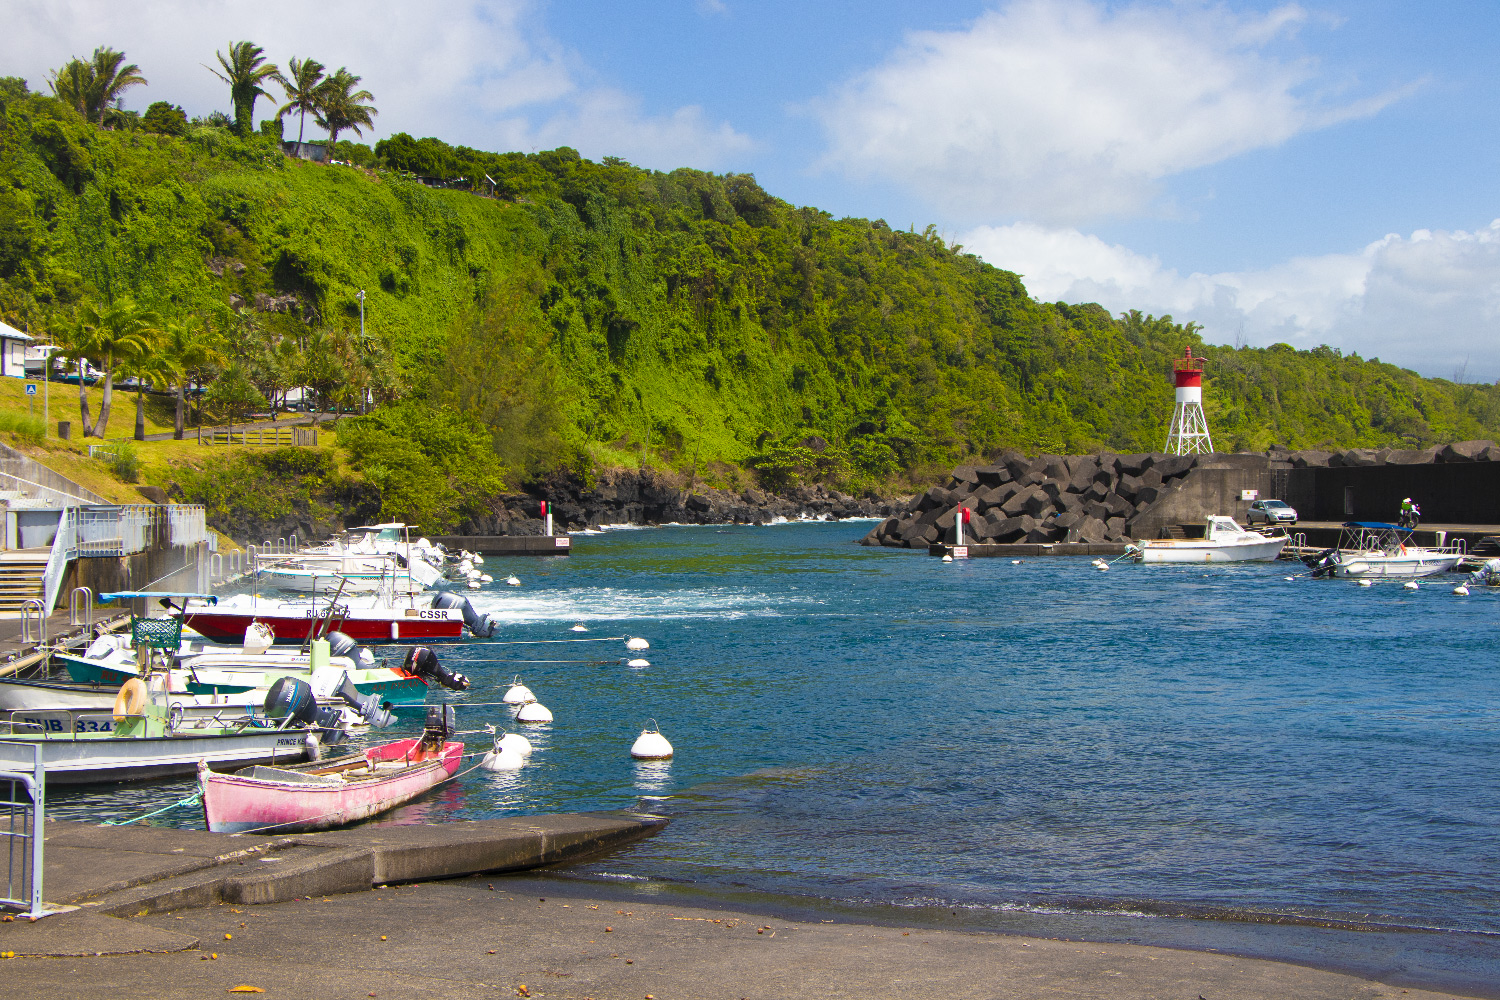 Breathe in the East of Reunion at La marine de Sainte-Rose. Fishing port with boats